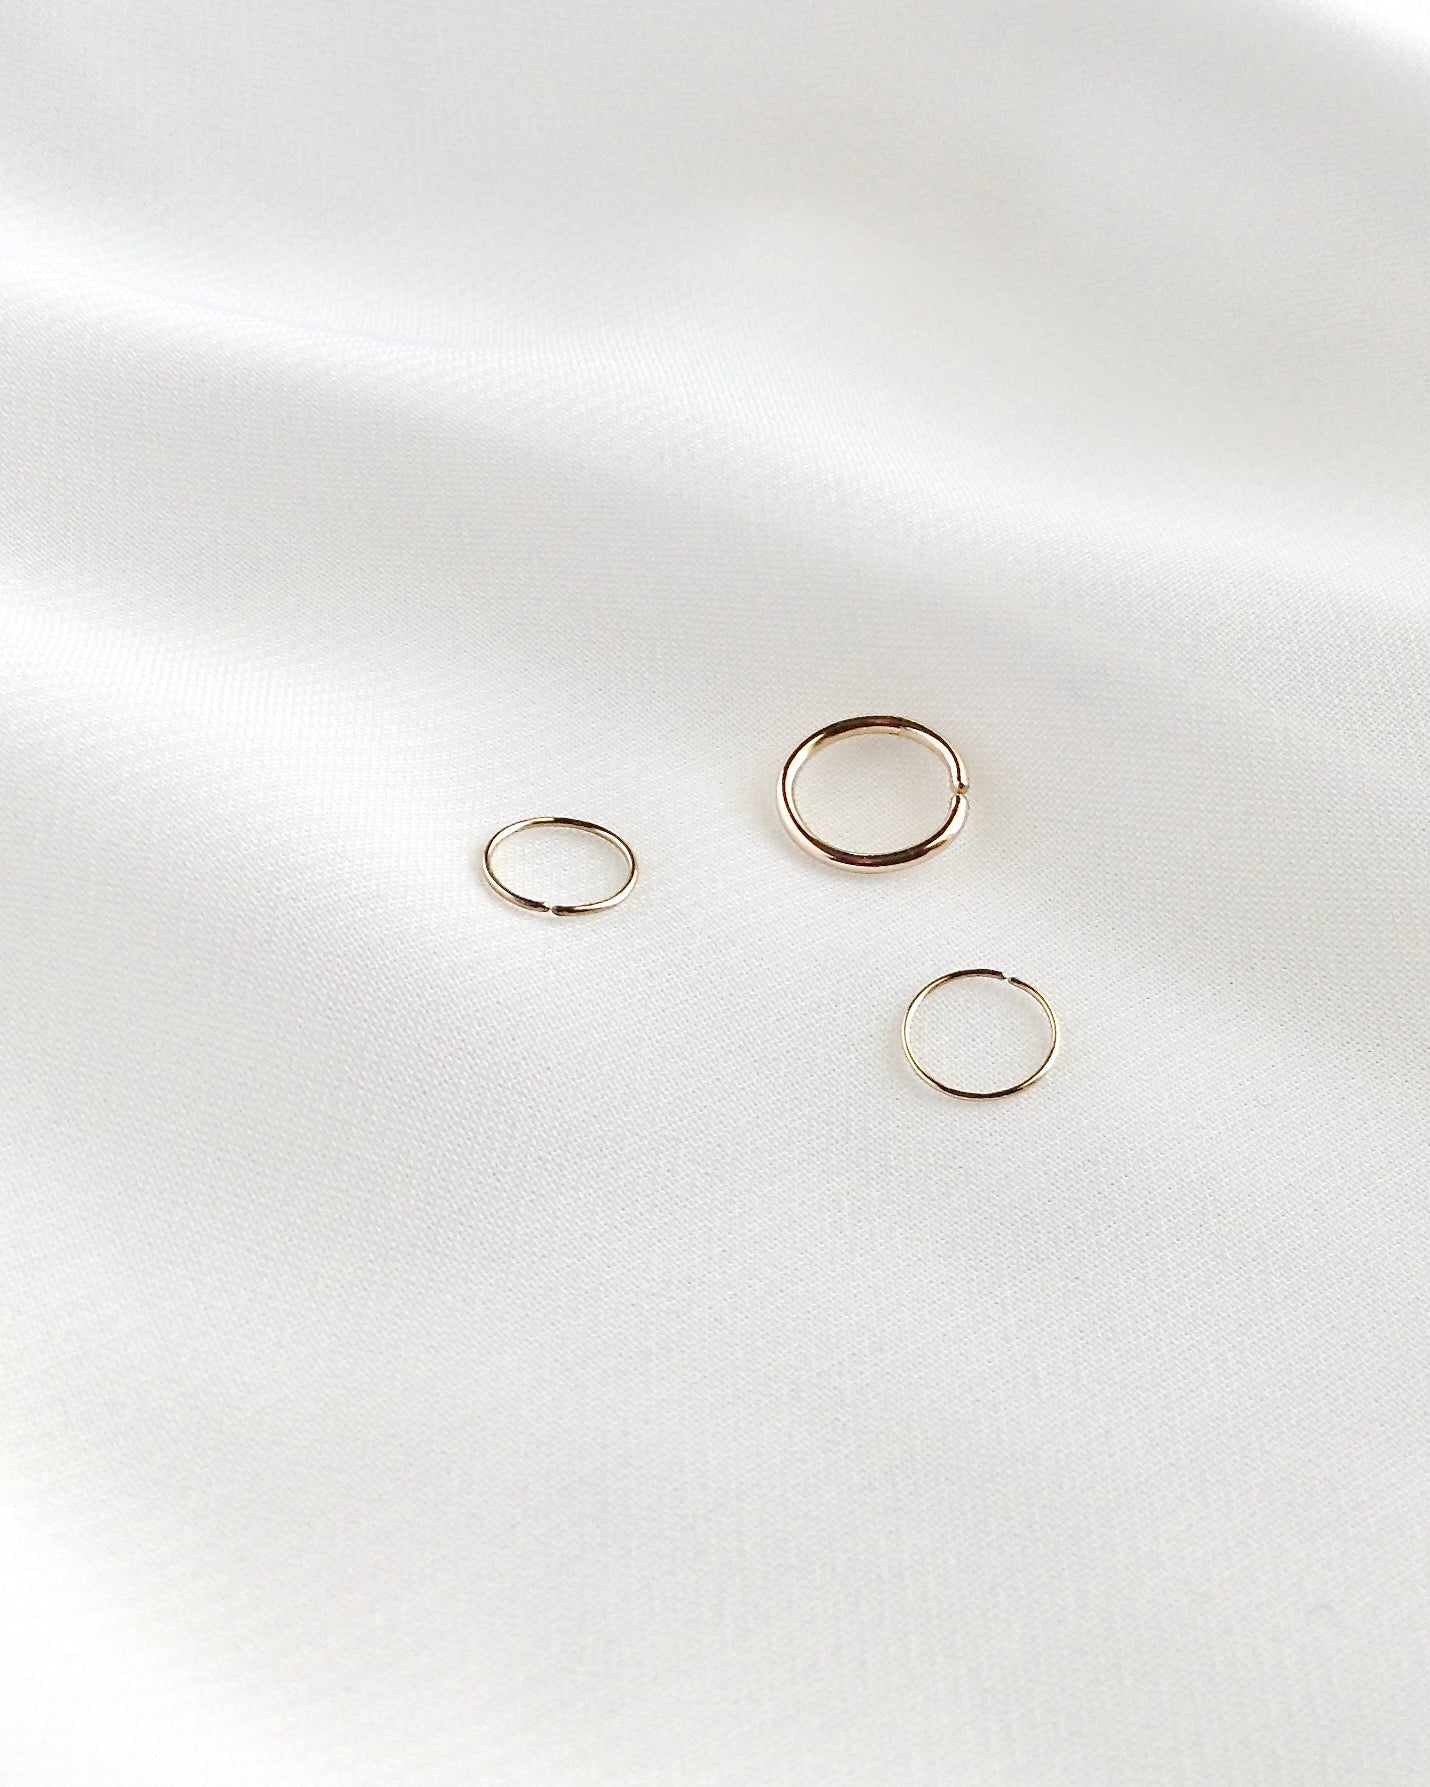 Gold Filled Nose Hoop | 6mm 7mm 8mm 9mm 10mm Thin Gold Filled Nose Ring Hoop | Small Snug Gold Nose Hoop